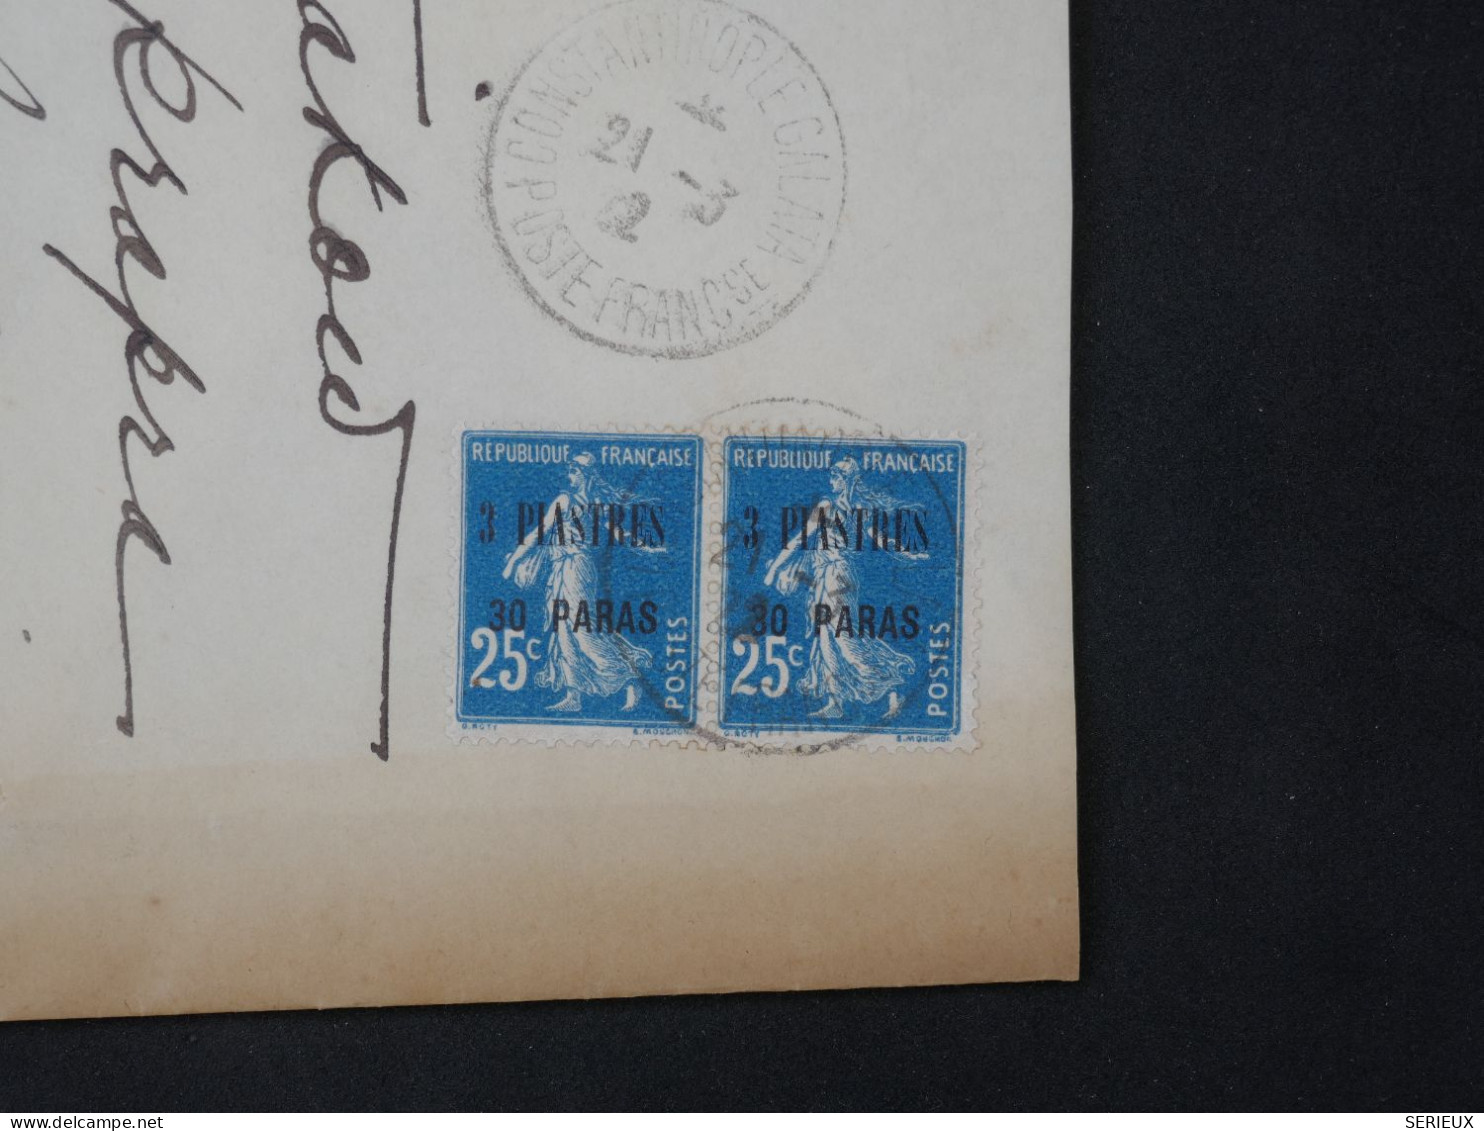 BV15 LEVANT FRANCE  BELLE LETTRE TRES RARE  1922 AMERICAN AMBASSY CONSTANTINOPLE A SOFIA BULGARIE   +2X TP SURCHARGE+ - Storia Postale